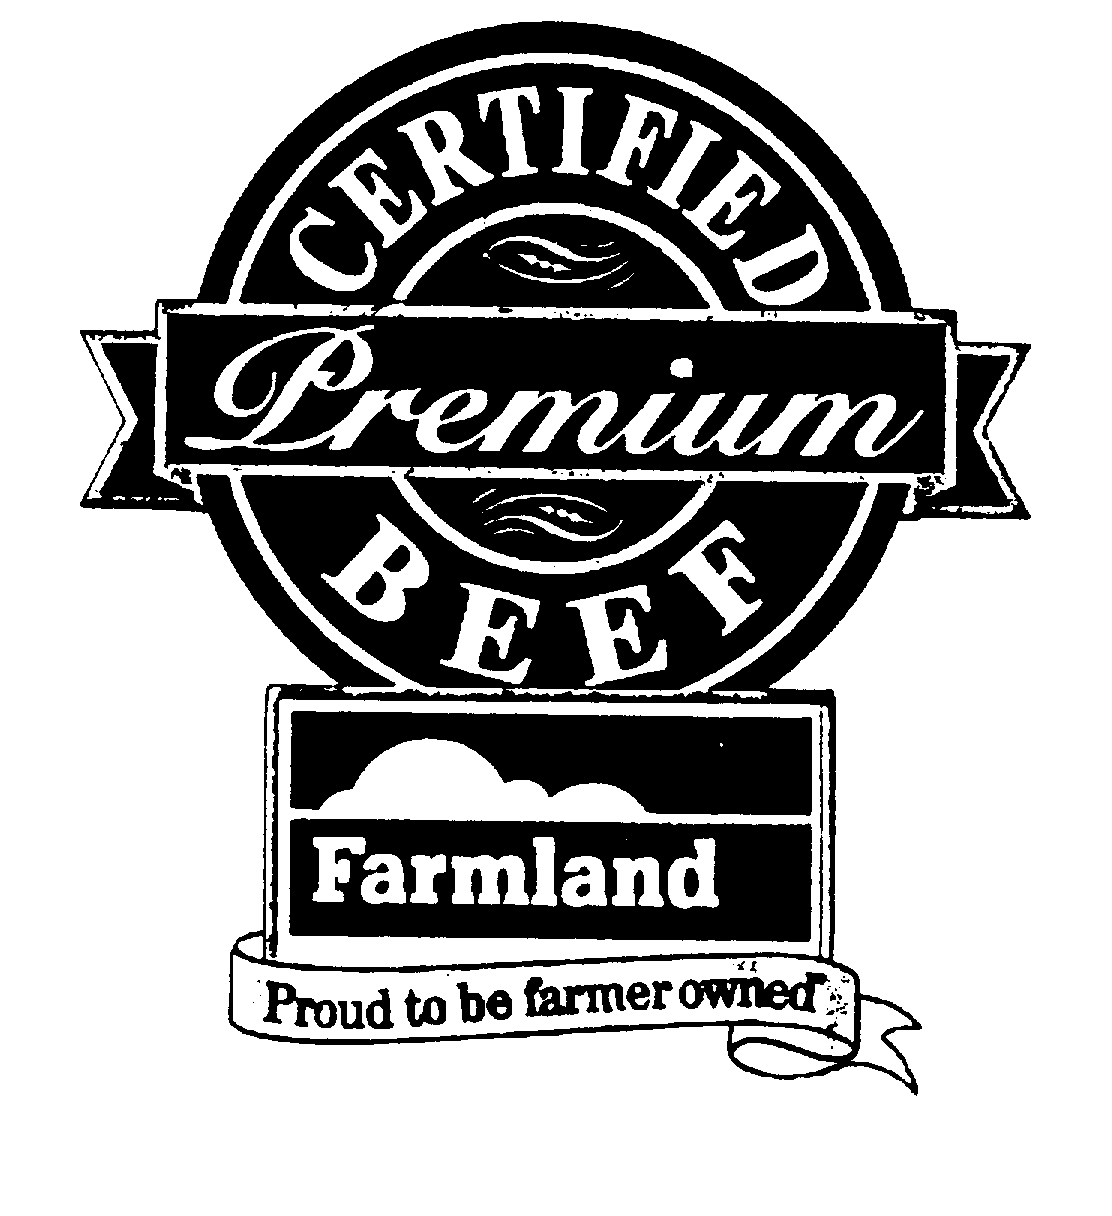  CERTIFIED PREMIUM BEEF FARMLAND PROUD TO BE FARMER OWNED